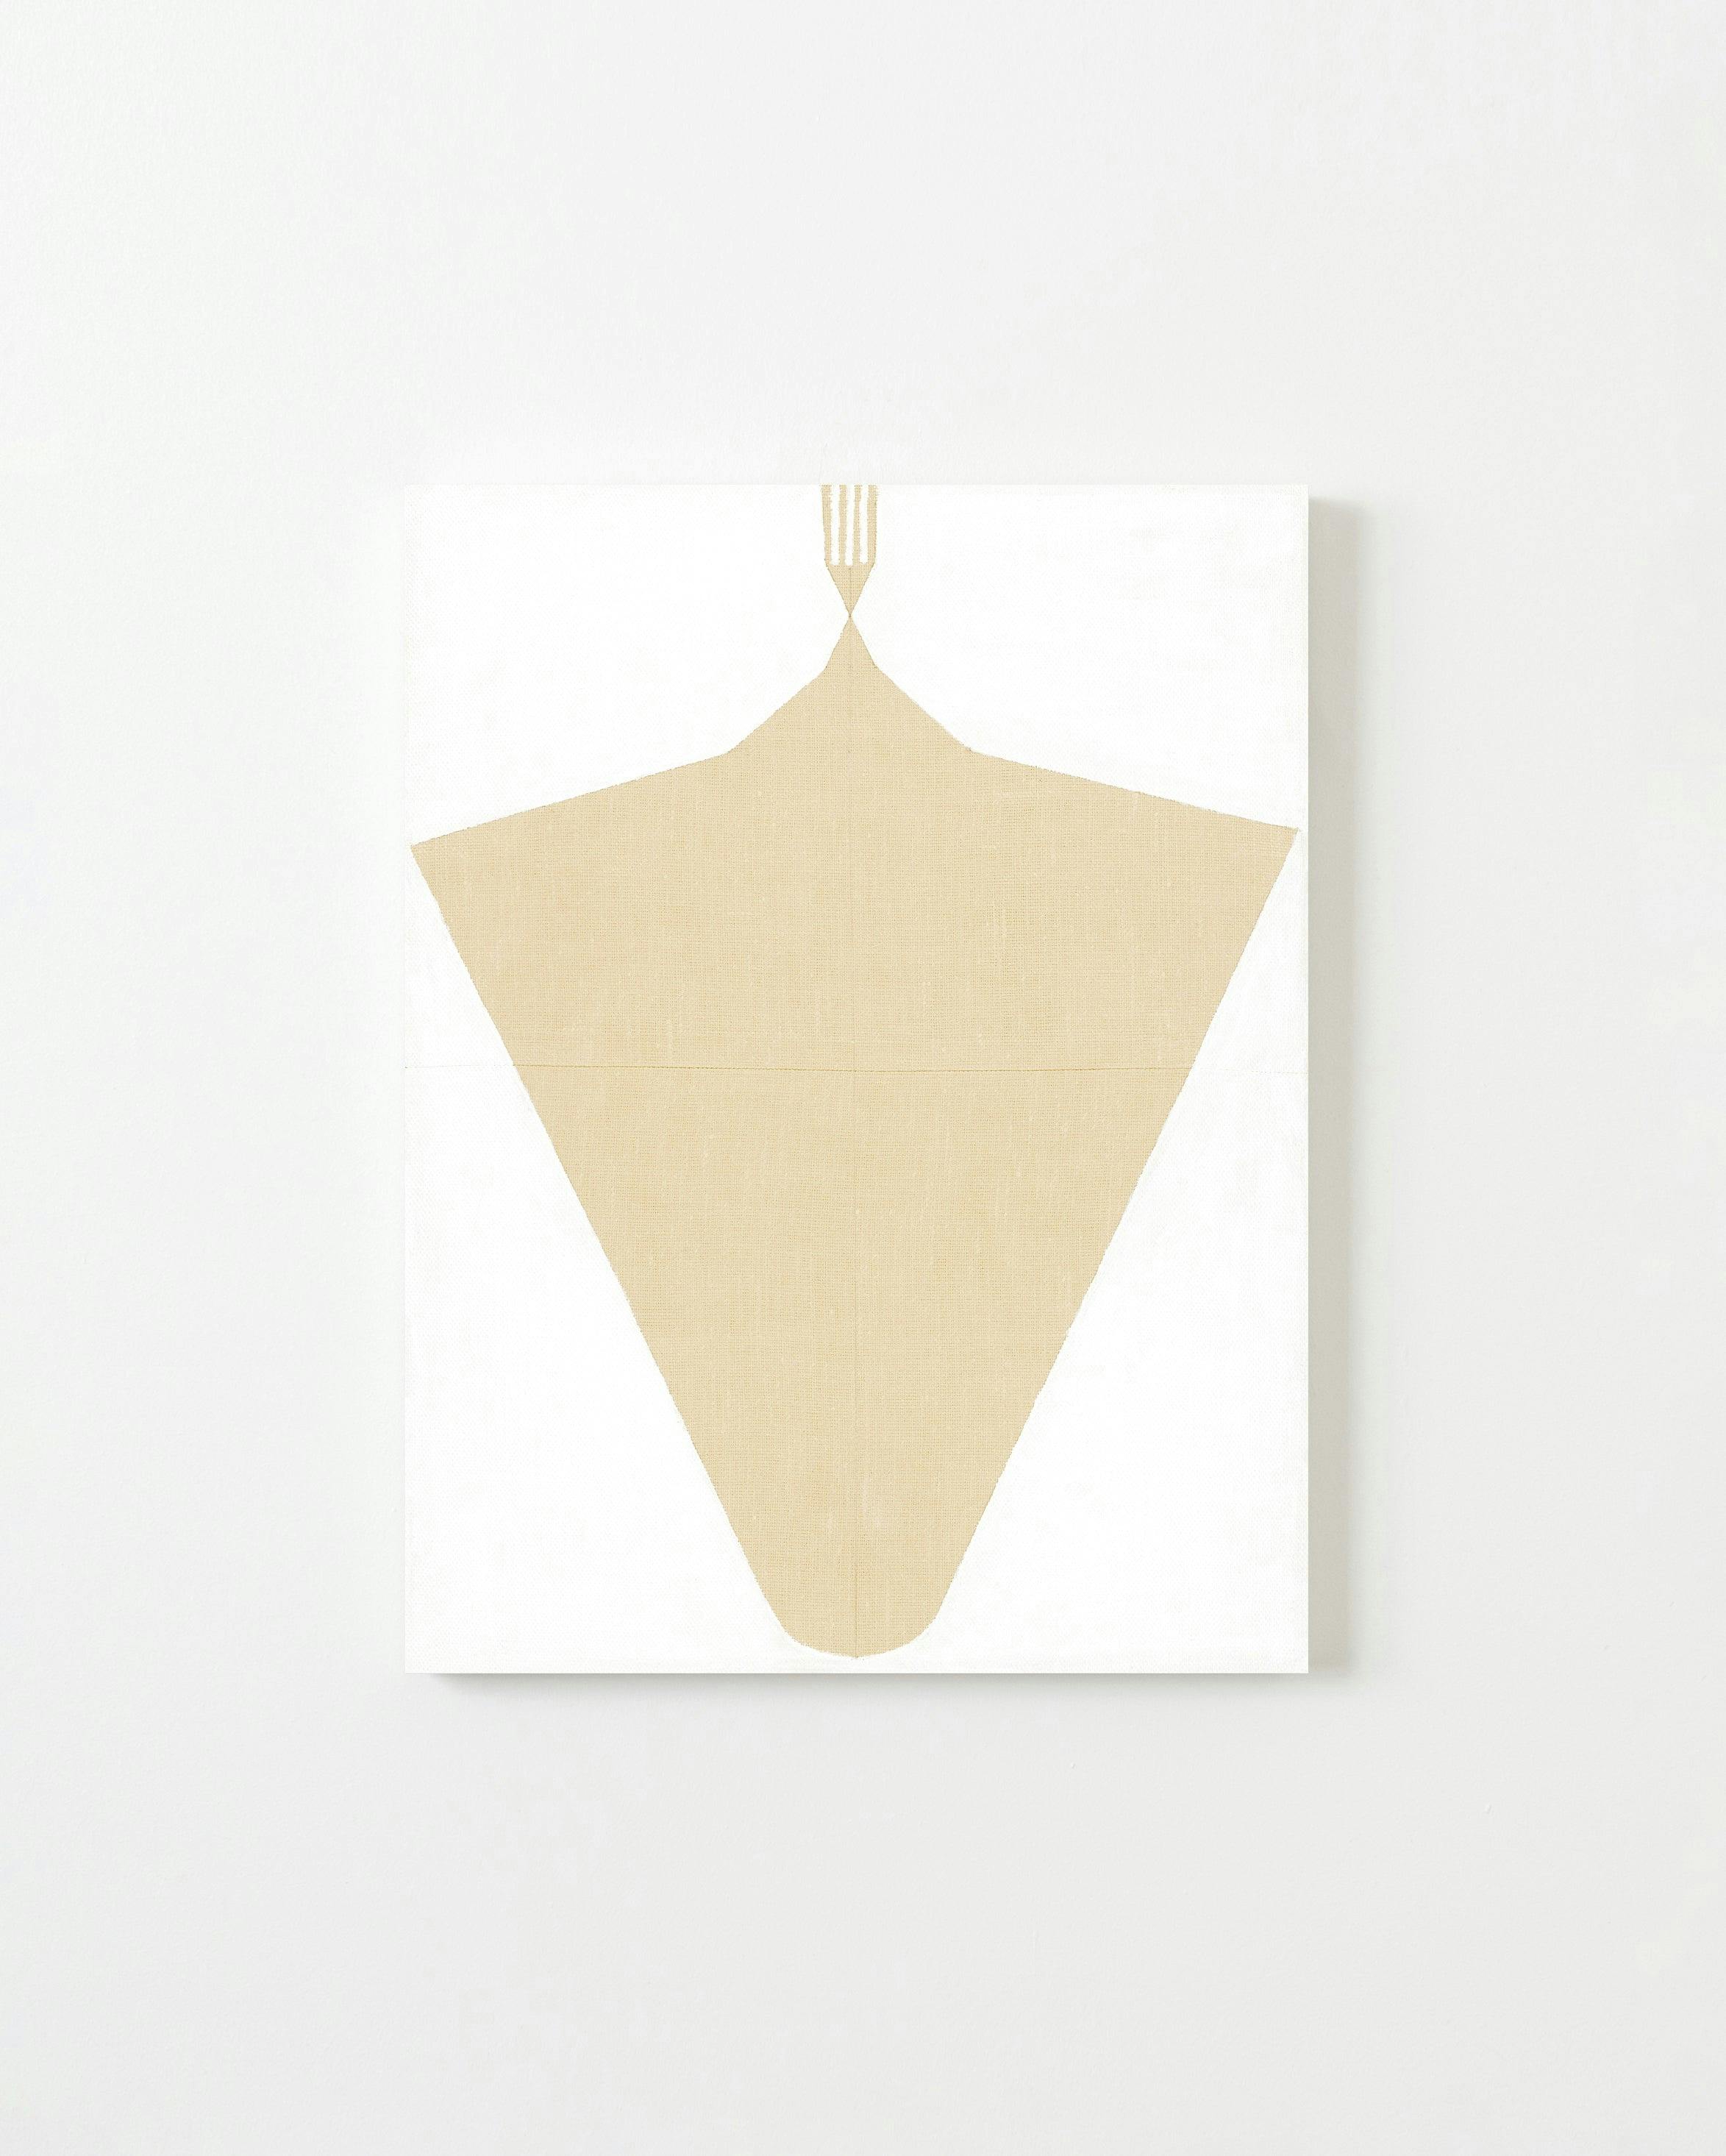 Aschely Vaughan Cone - Small White Ray I - Painting